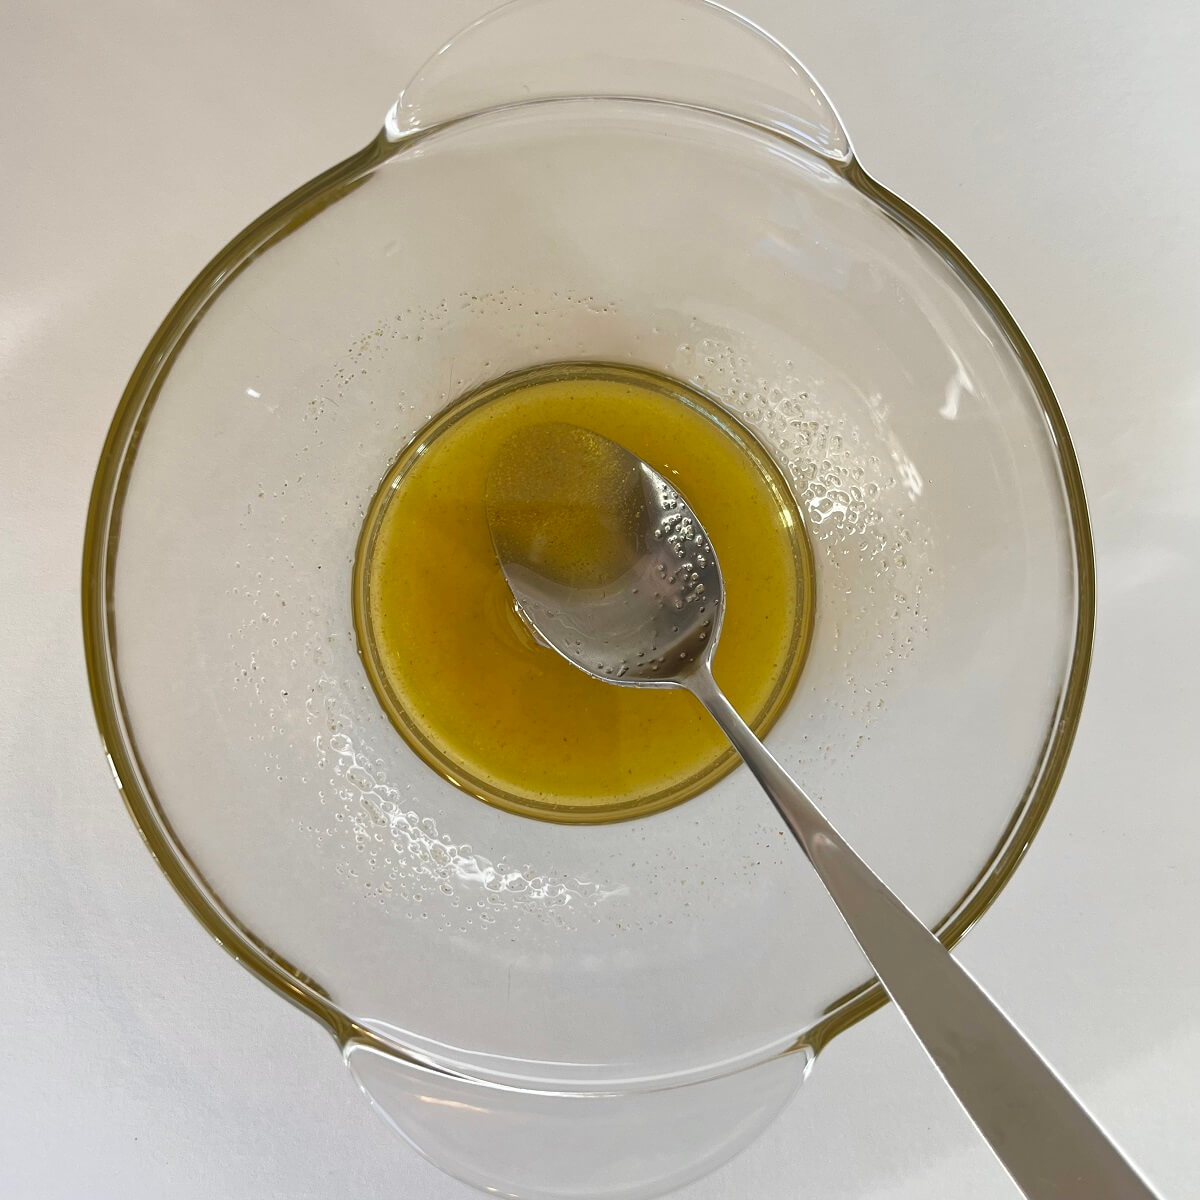 Olive oil and spices in a glass bowl with a spoon.